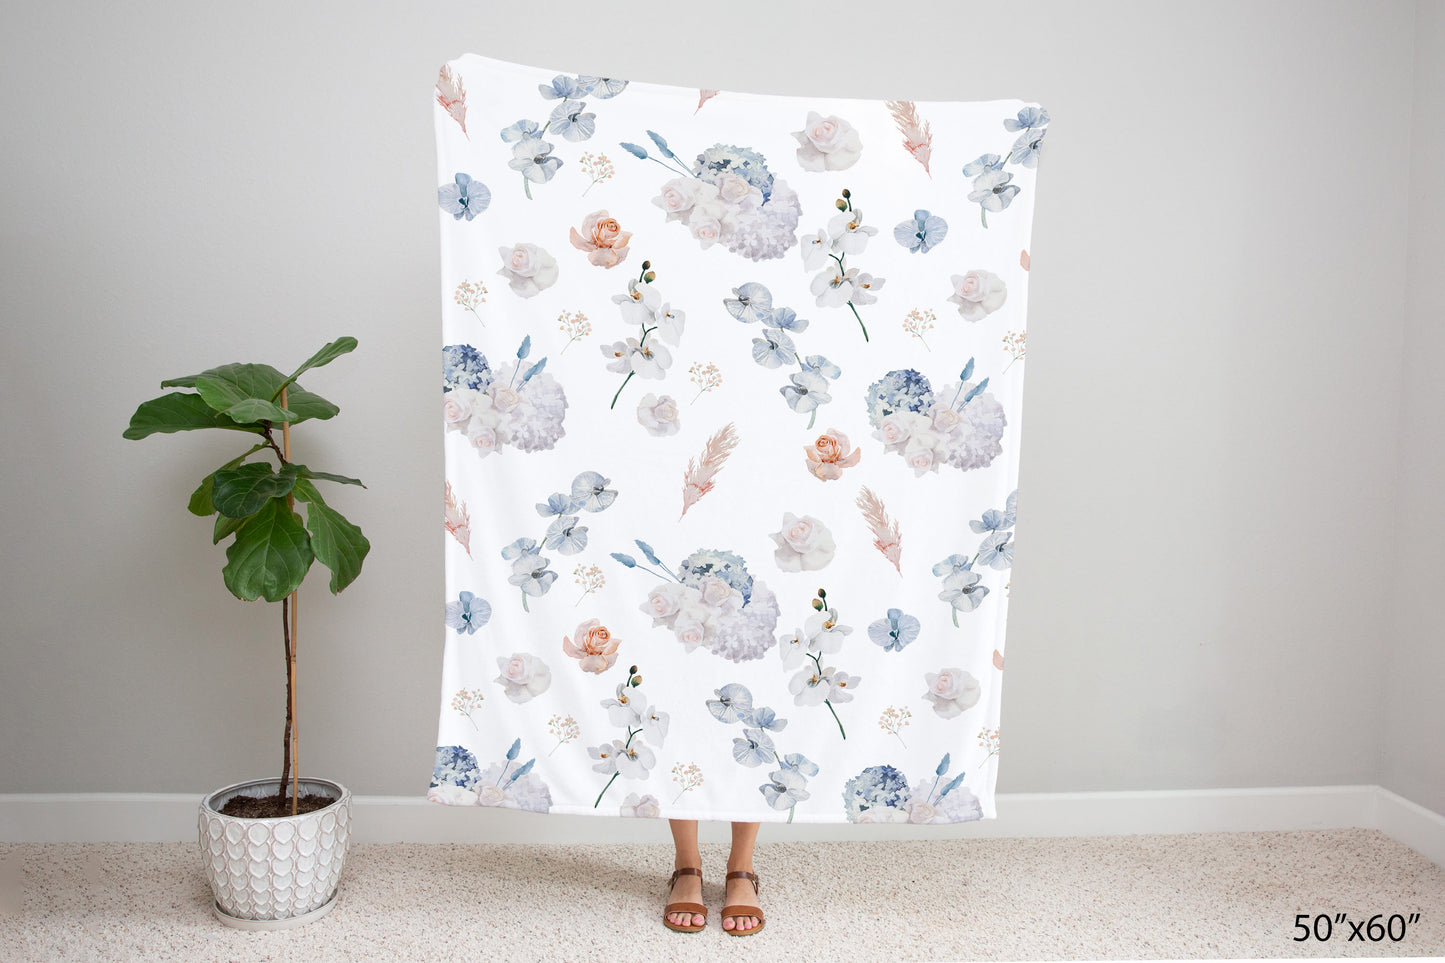 Coral and Dusty Blue Flowers Minky Blanket, Floral Nursery Bedding - Delicate Breeze